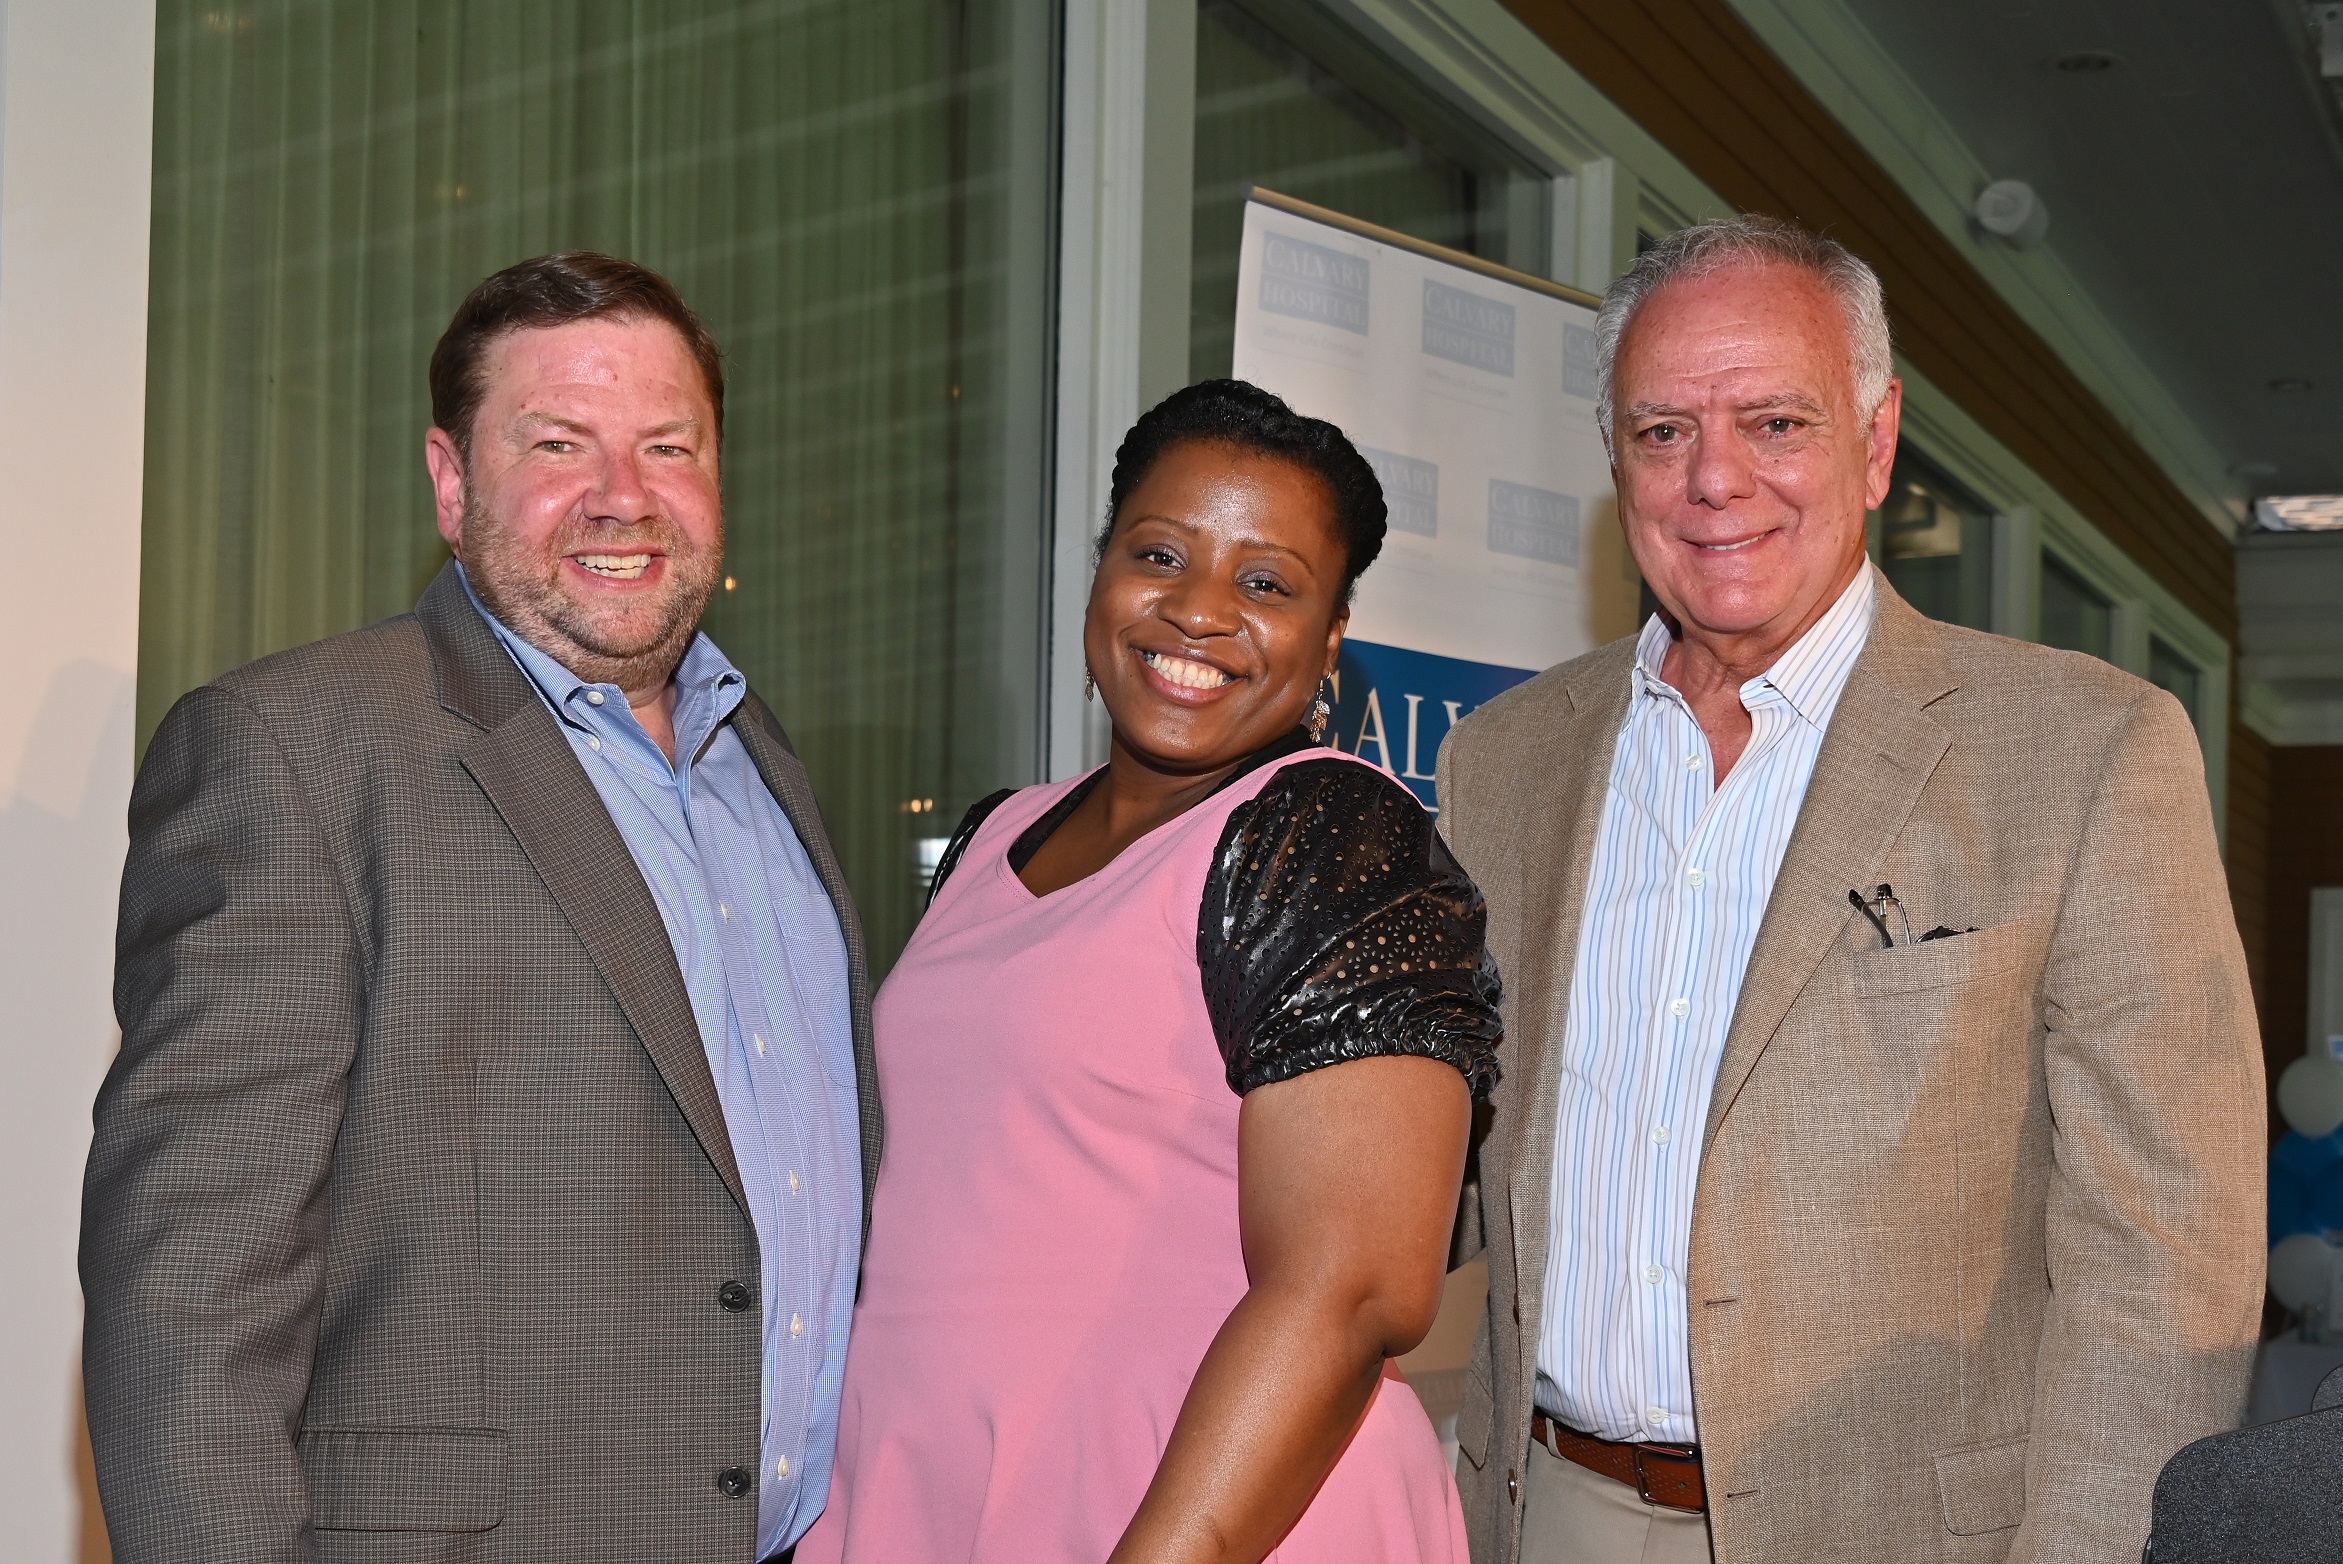 Pictured: Dennis Berberich (left) and Frank A. Calamari (right) with Davida Amaker, winner of the 2021 Dennis Berberich Scholarship for Calvary Care Technicians.